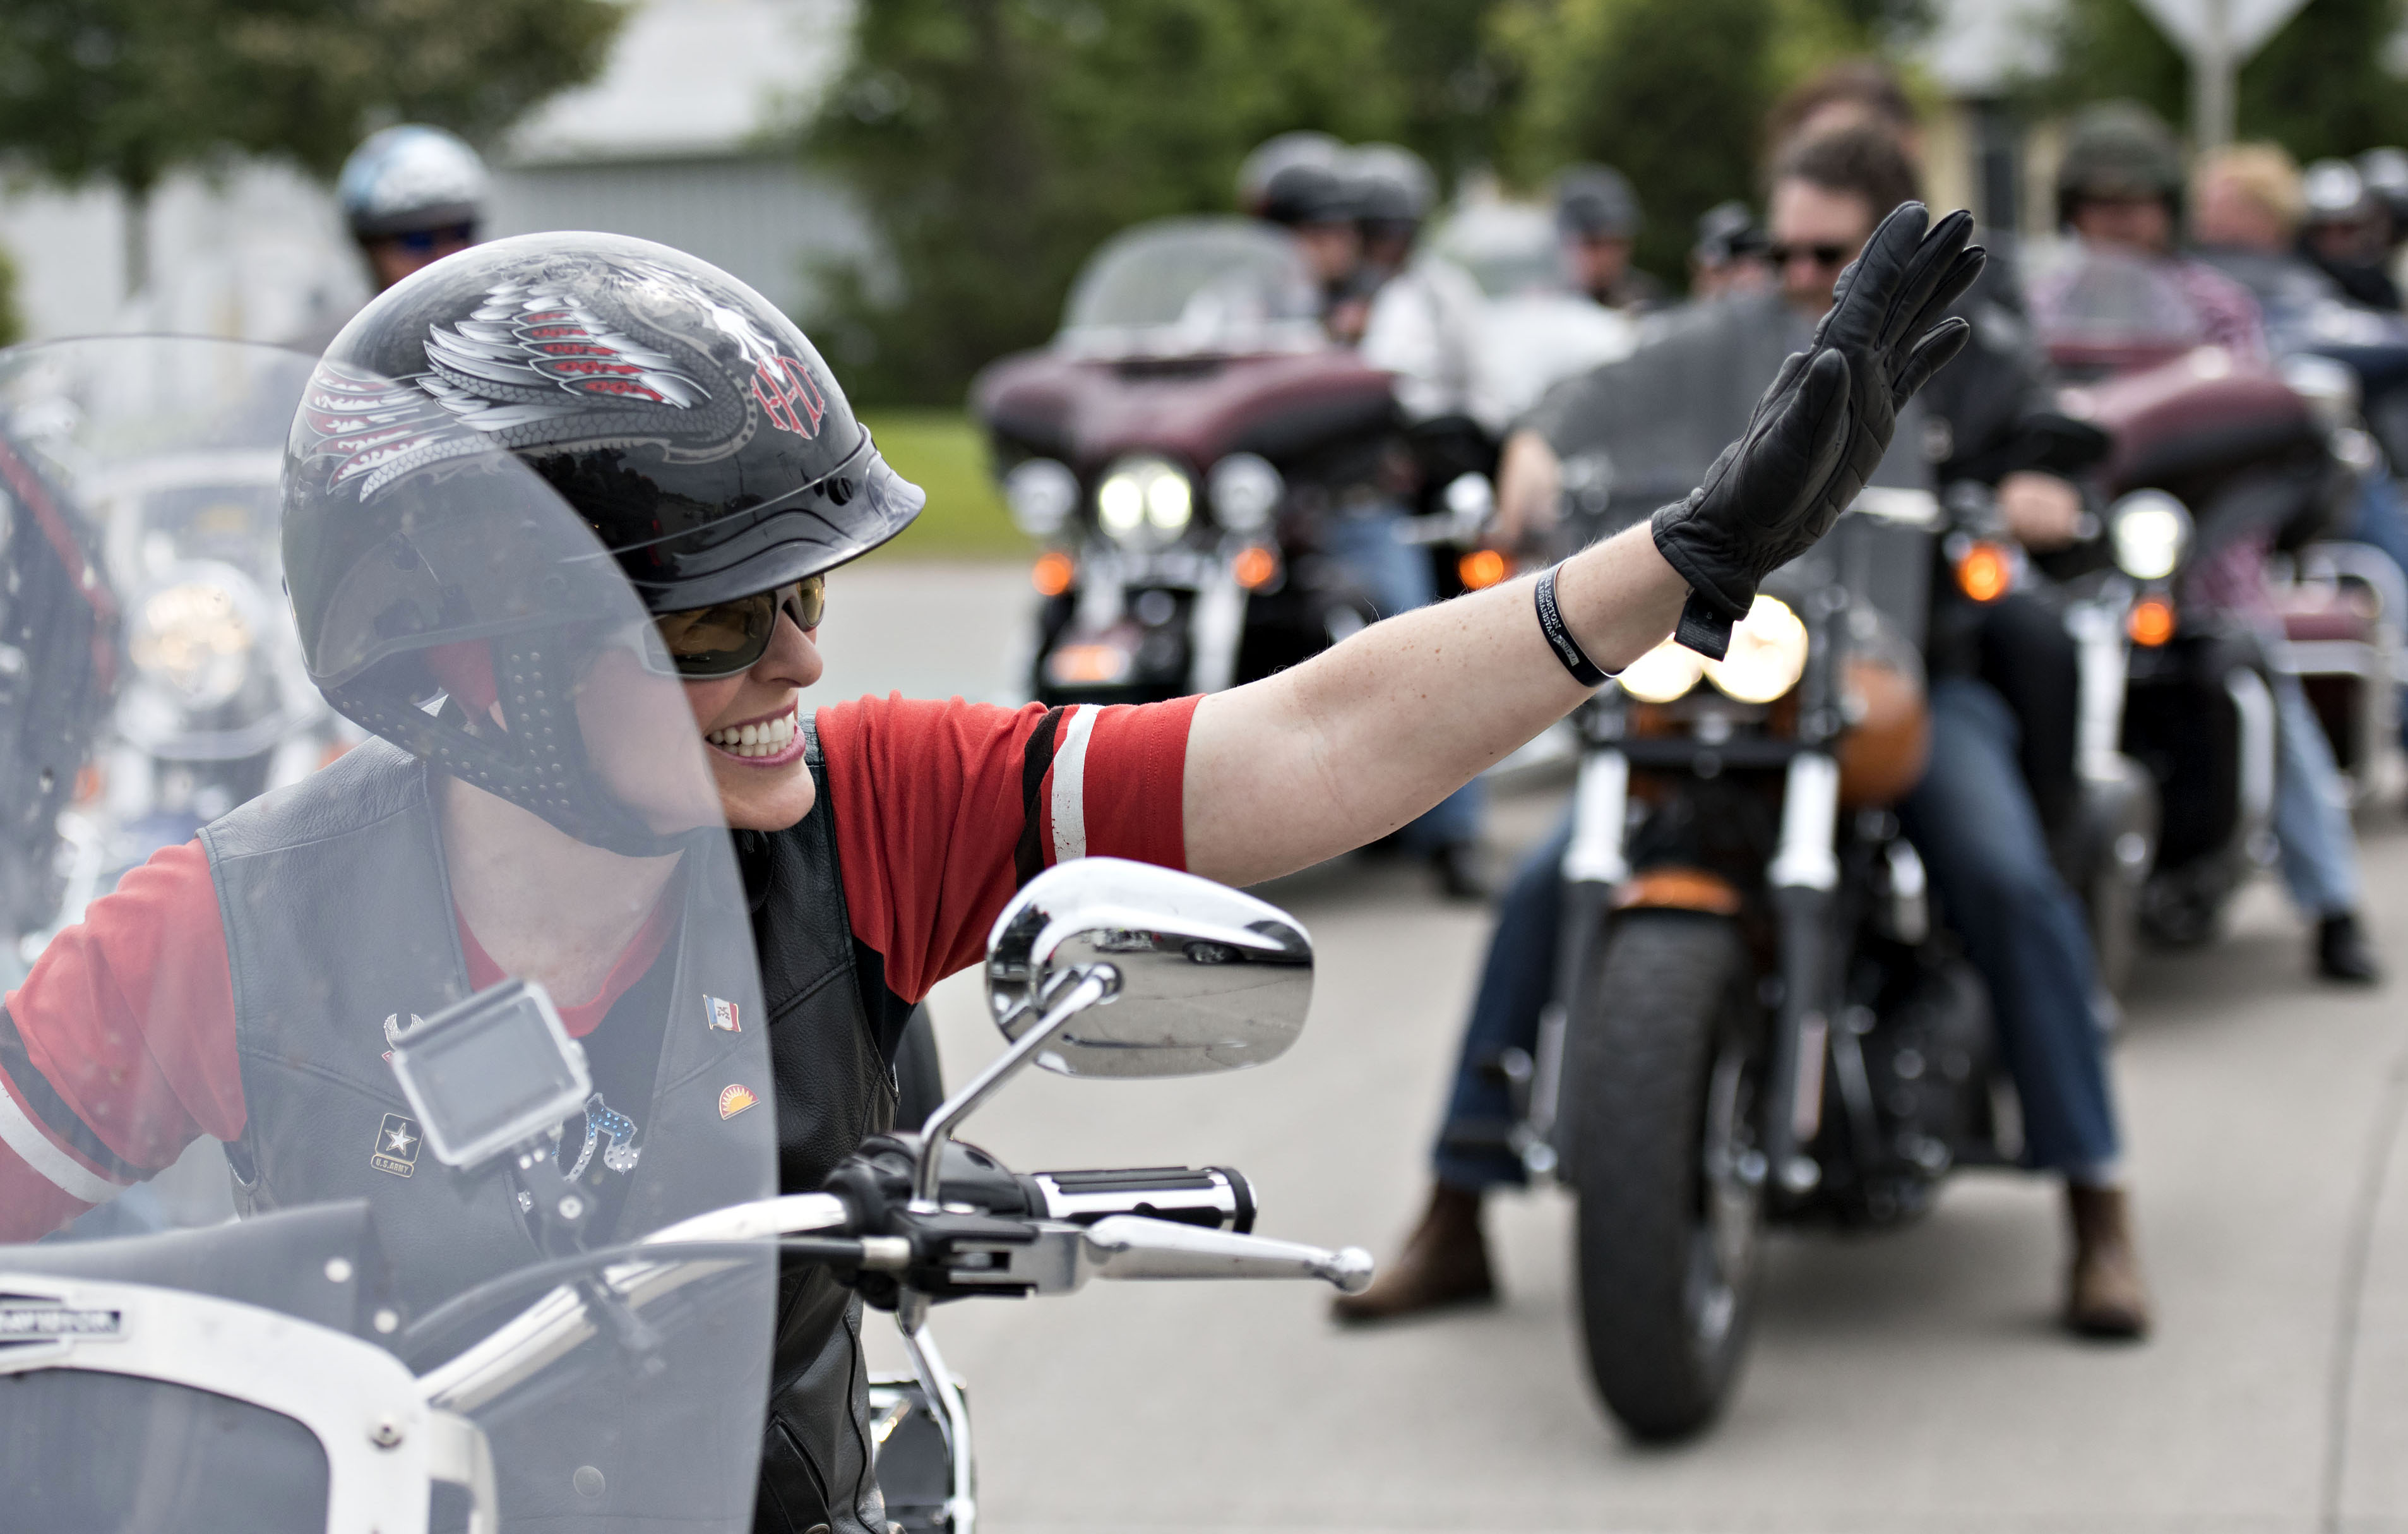 Senator Joni Ernst, a Republican from Iowa, waves to supporters as she rides the lead bike in a group motorcycle ride in Des Moines, Iowa, U.S., on Saturday, June 6, 2015.